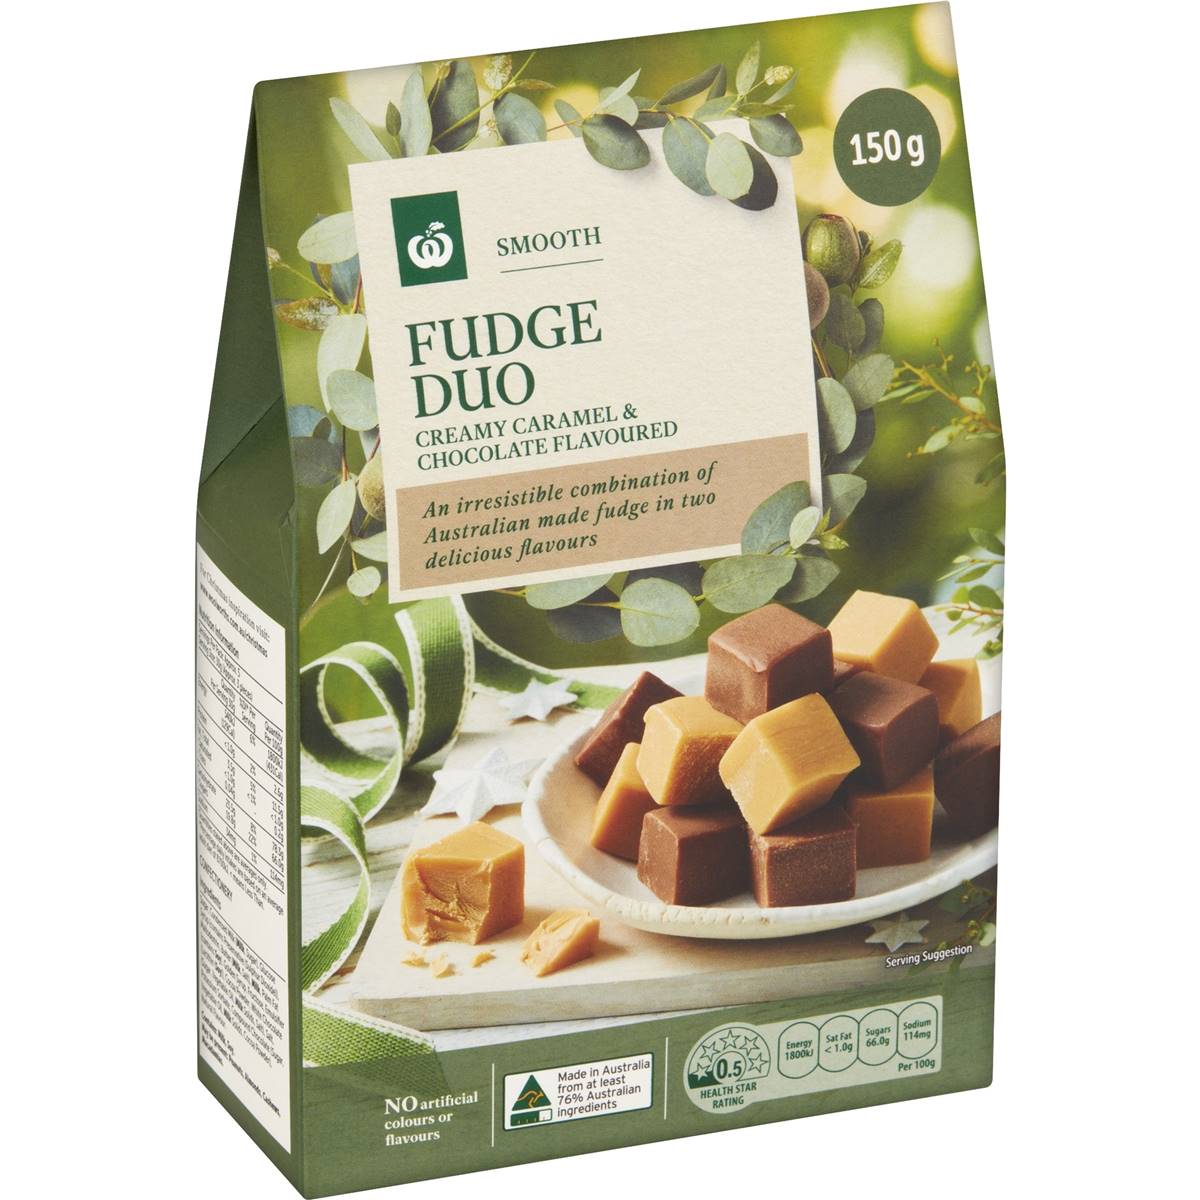 Calories in Woolworths Fudge Duo Caramel & Chocolate